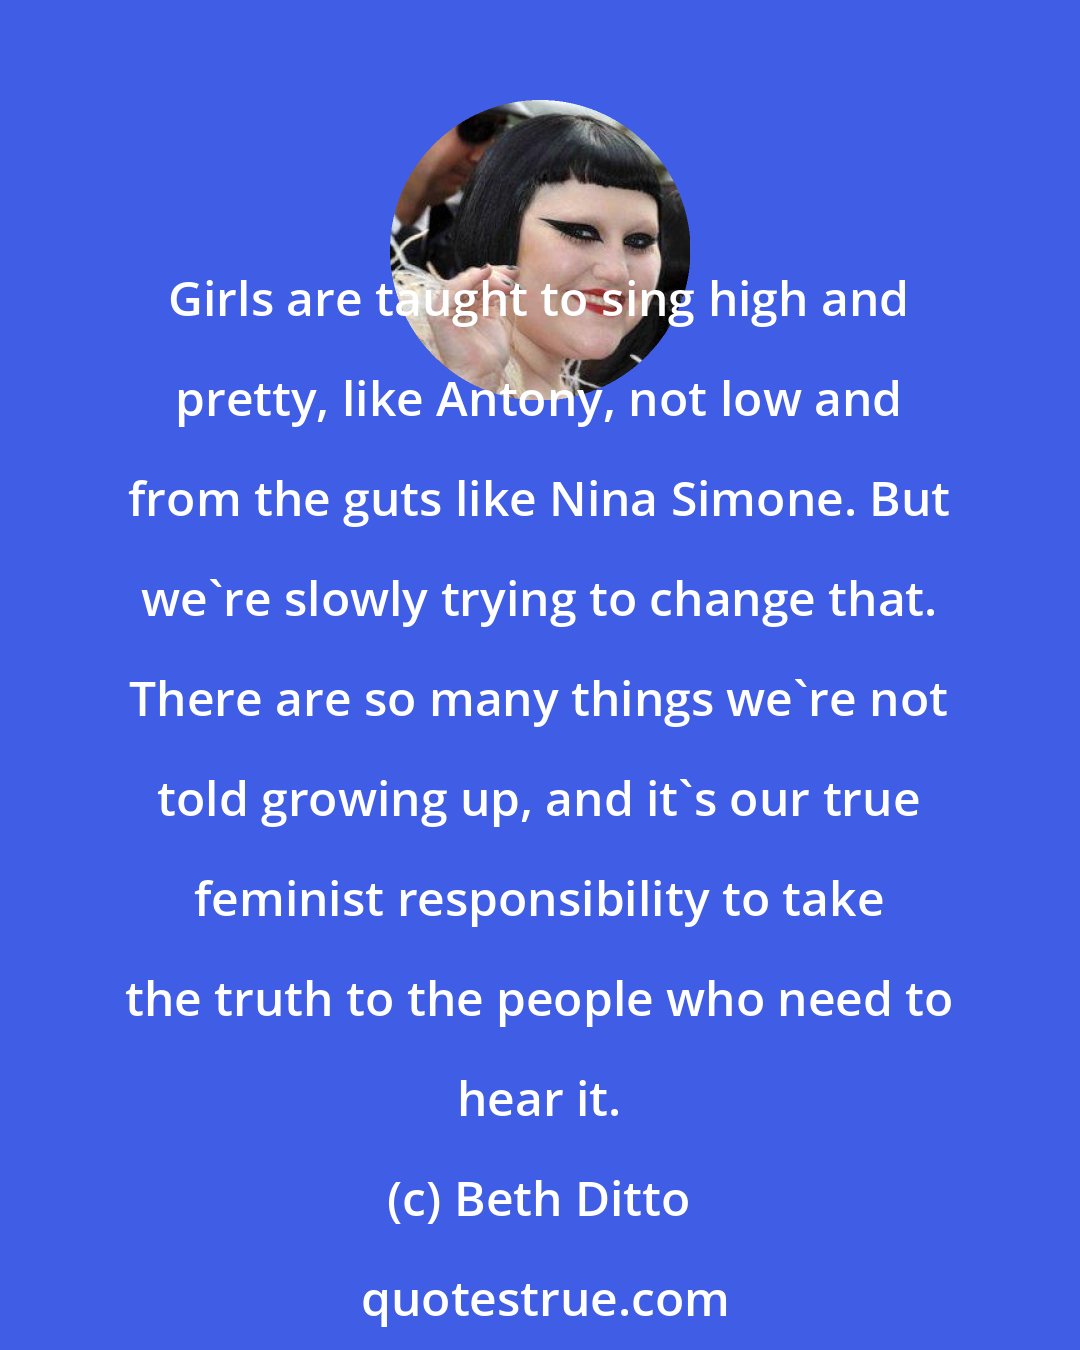 Beth Ditto: Girls are taught to sing high and pretty, like Antony, not low and from the guts like Nina Simone. But we're slowly trying to change that. There are so many things we're not told growing up, and it's our true feminist responsibility to take the truth to the people who need to hear it.